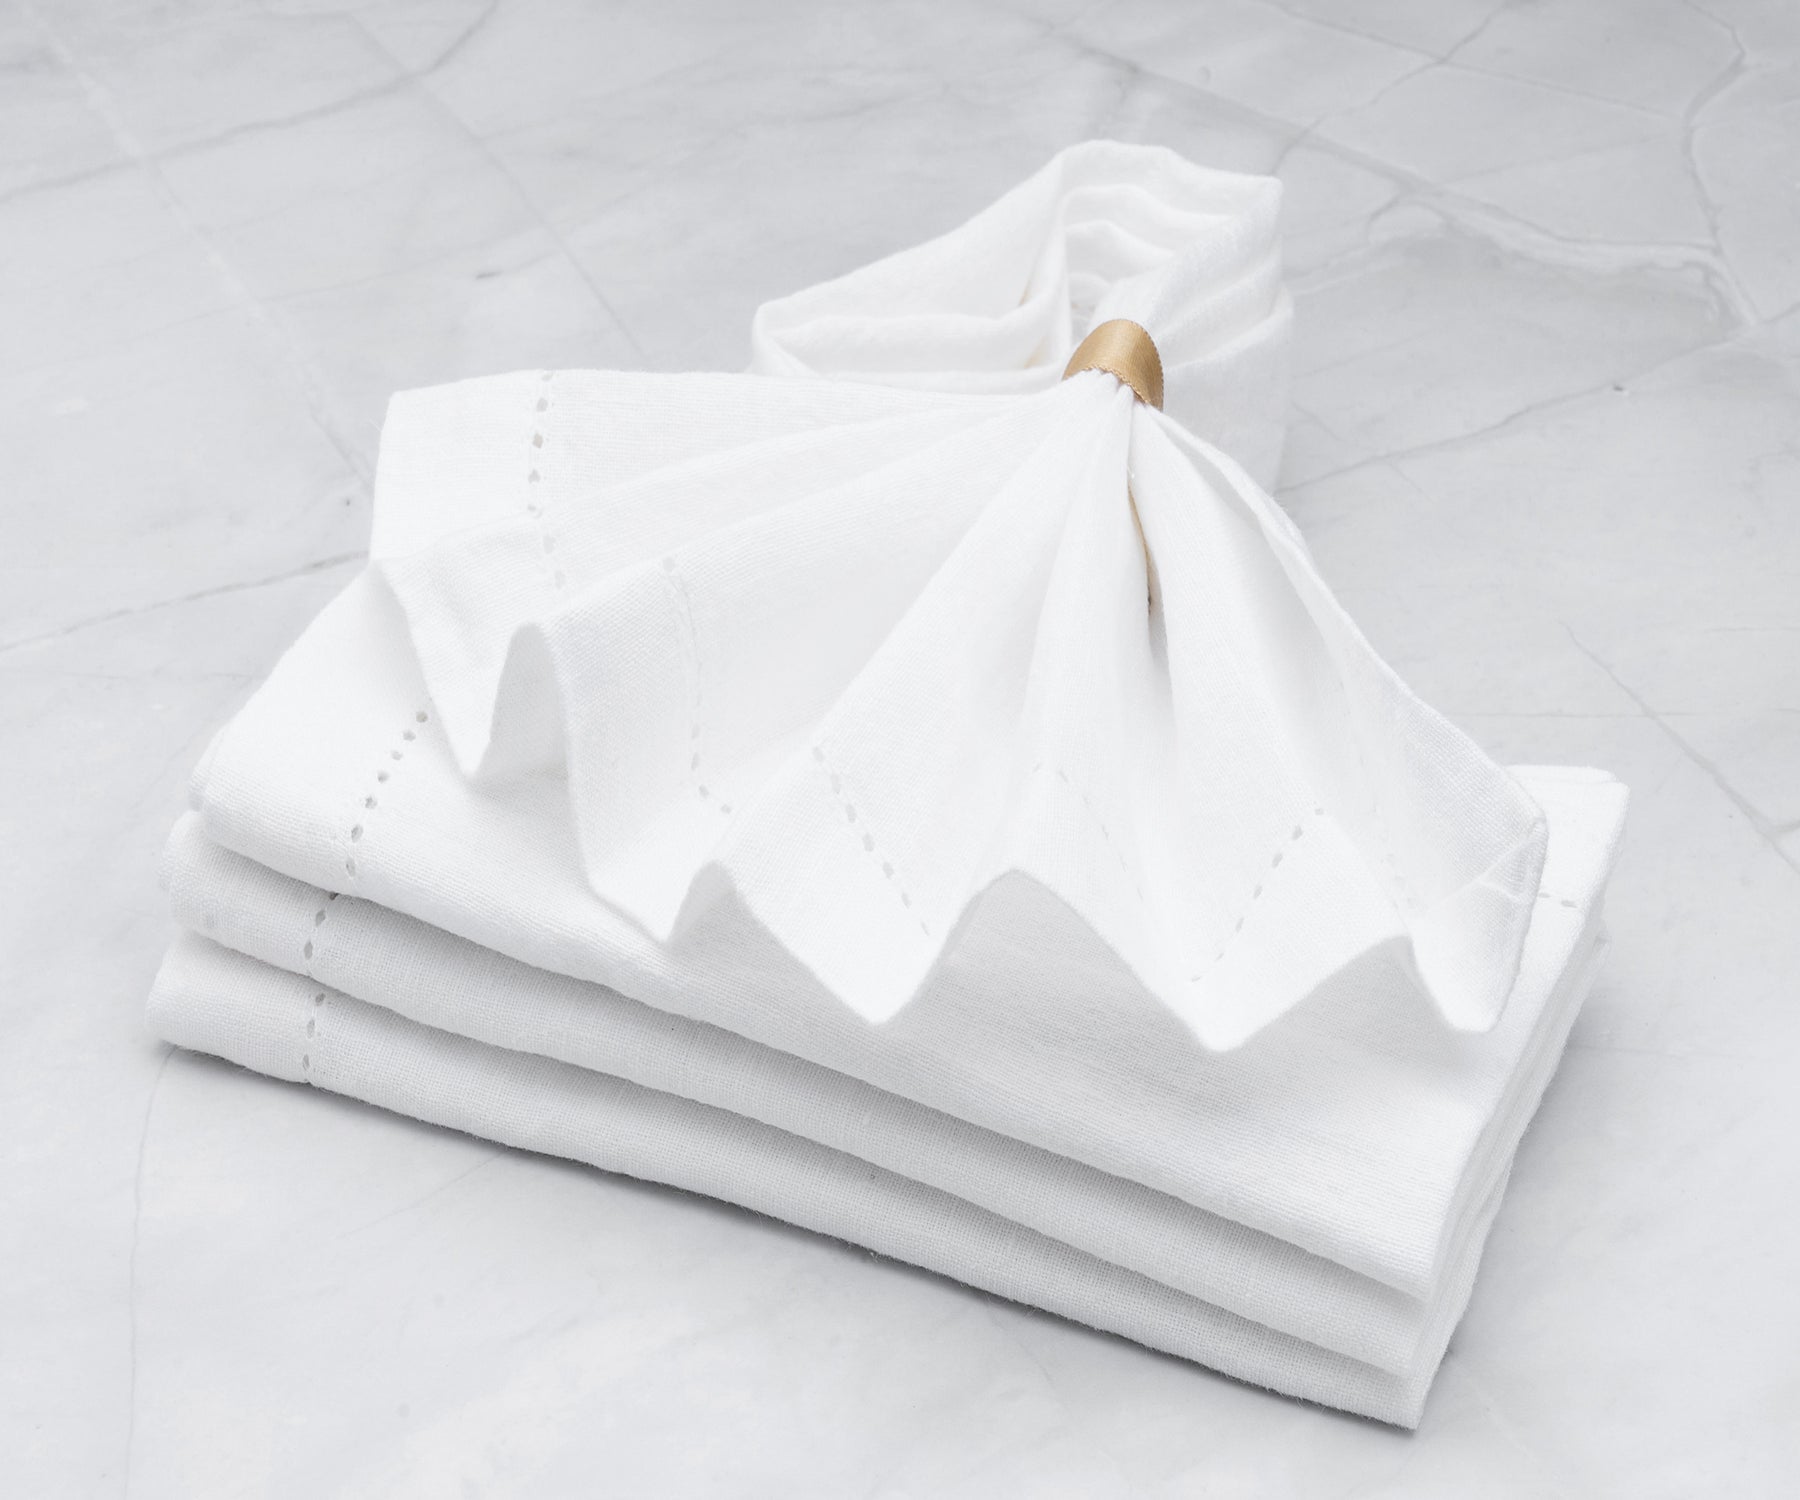 Dark Linen Napkins: Create a sophisticated and moody ambiance with our Dark Linen Napkins, perfect for adding depth and drama to your table setting.